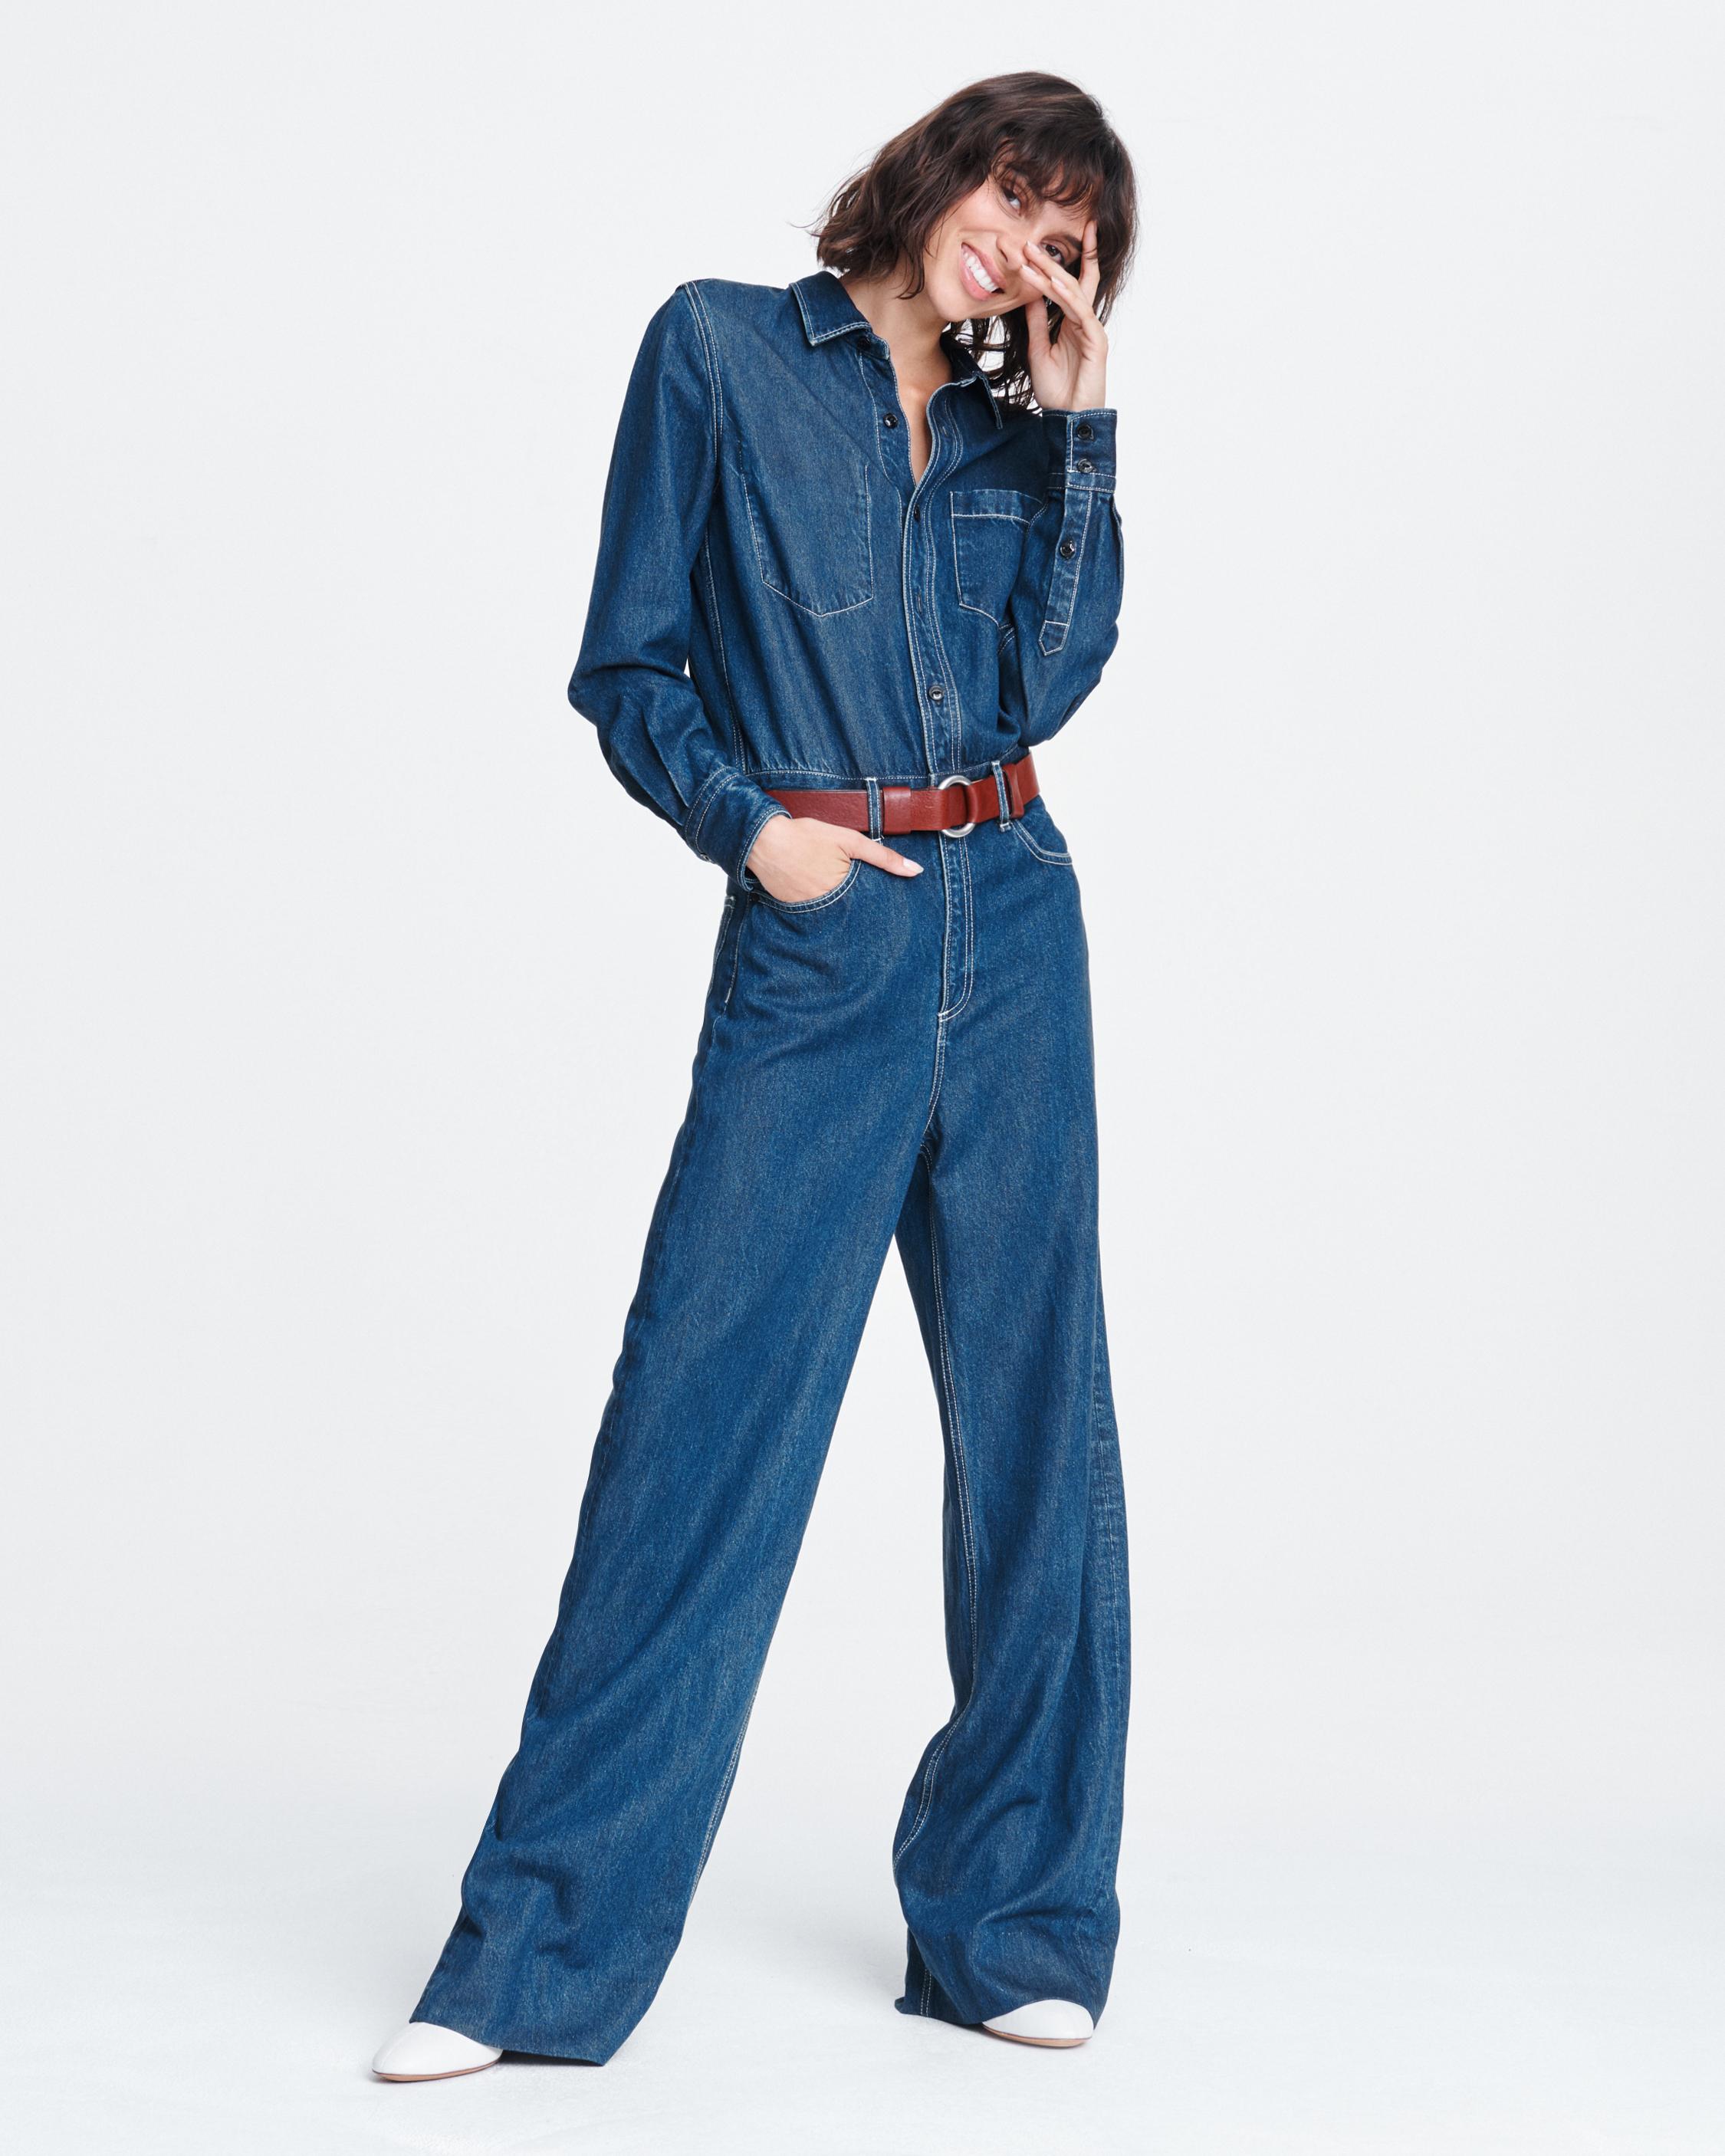 all in one denim jumpsuit